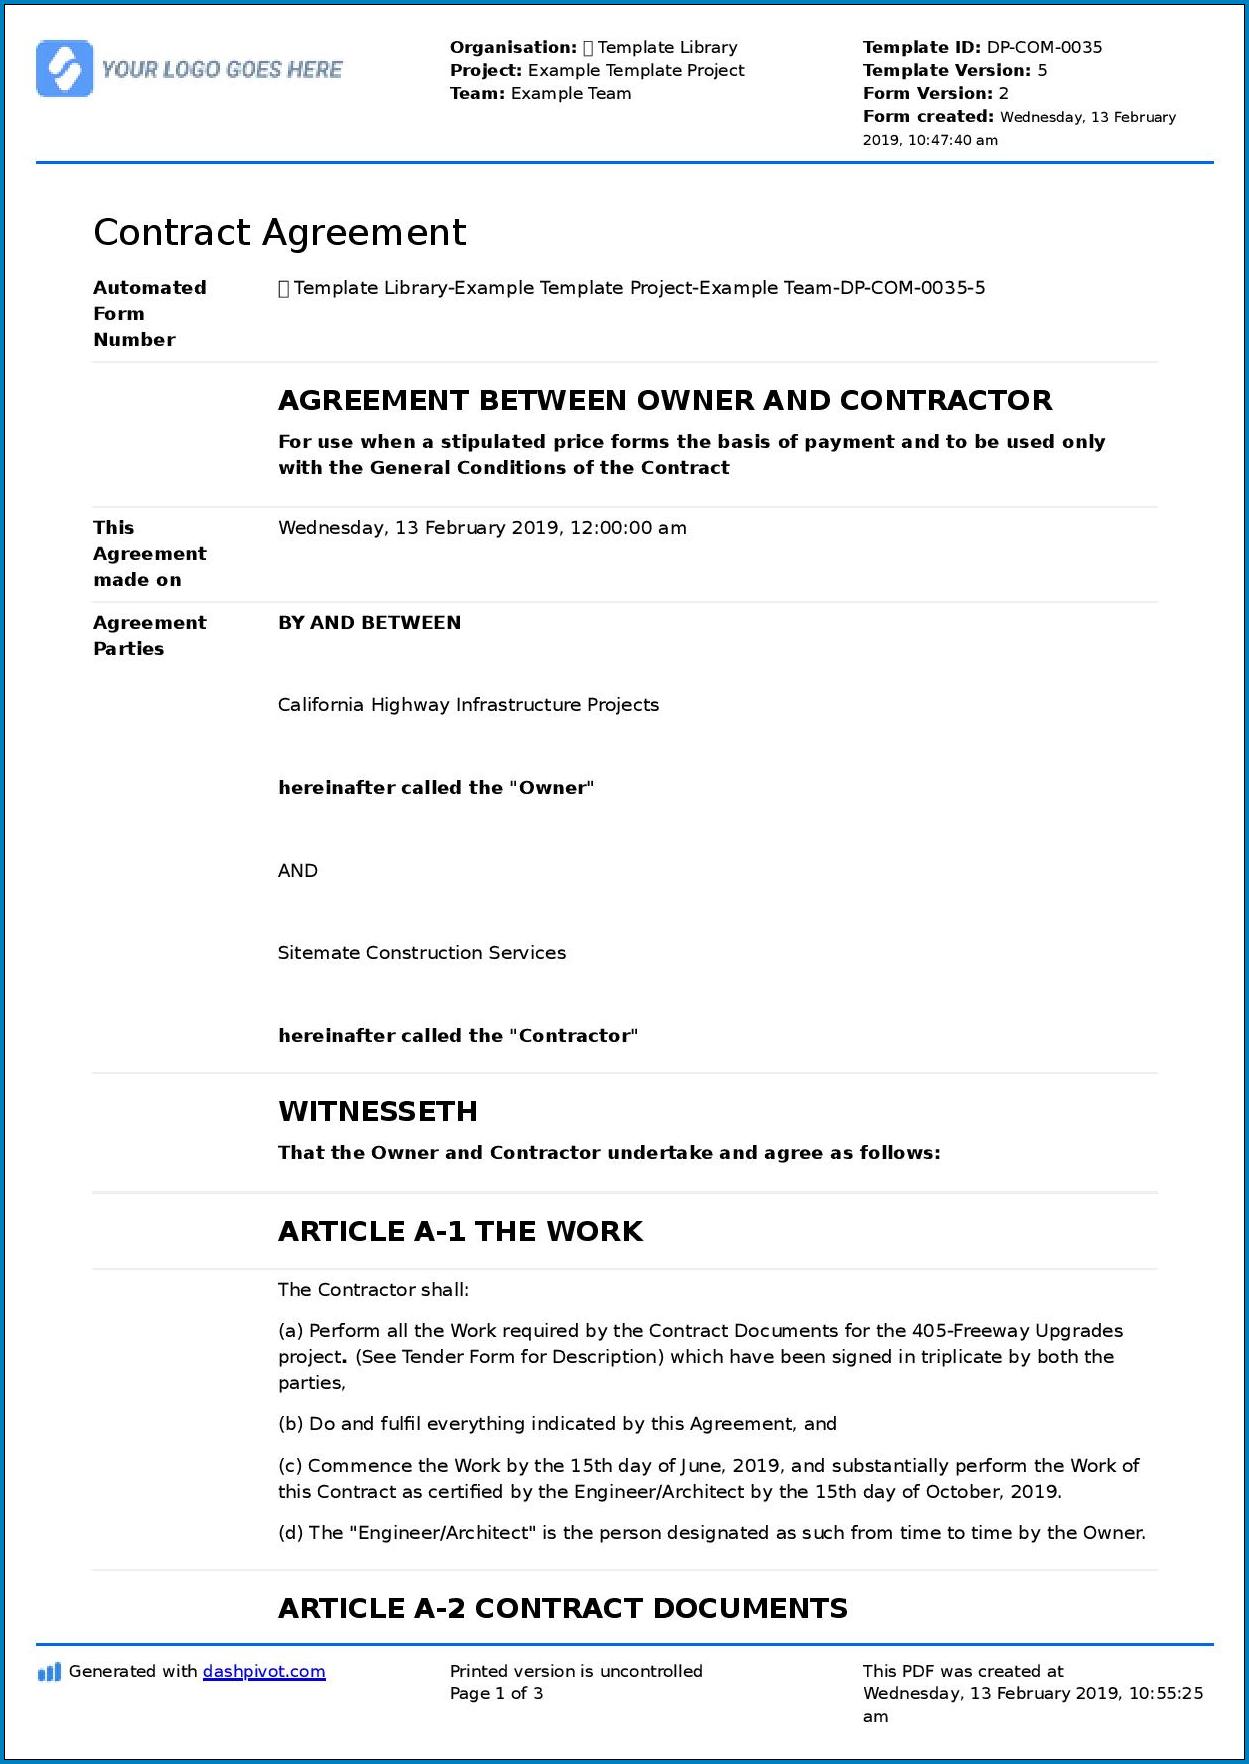 Example of Contract Agreement For Construction Work